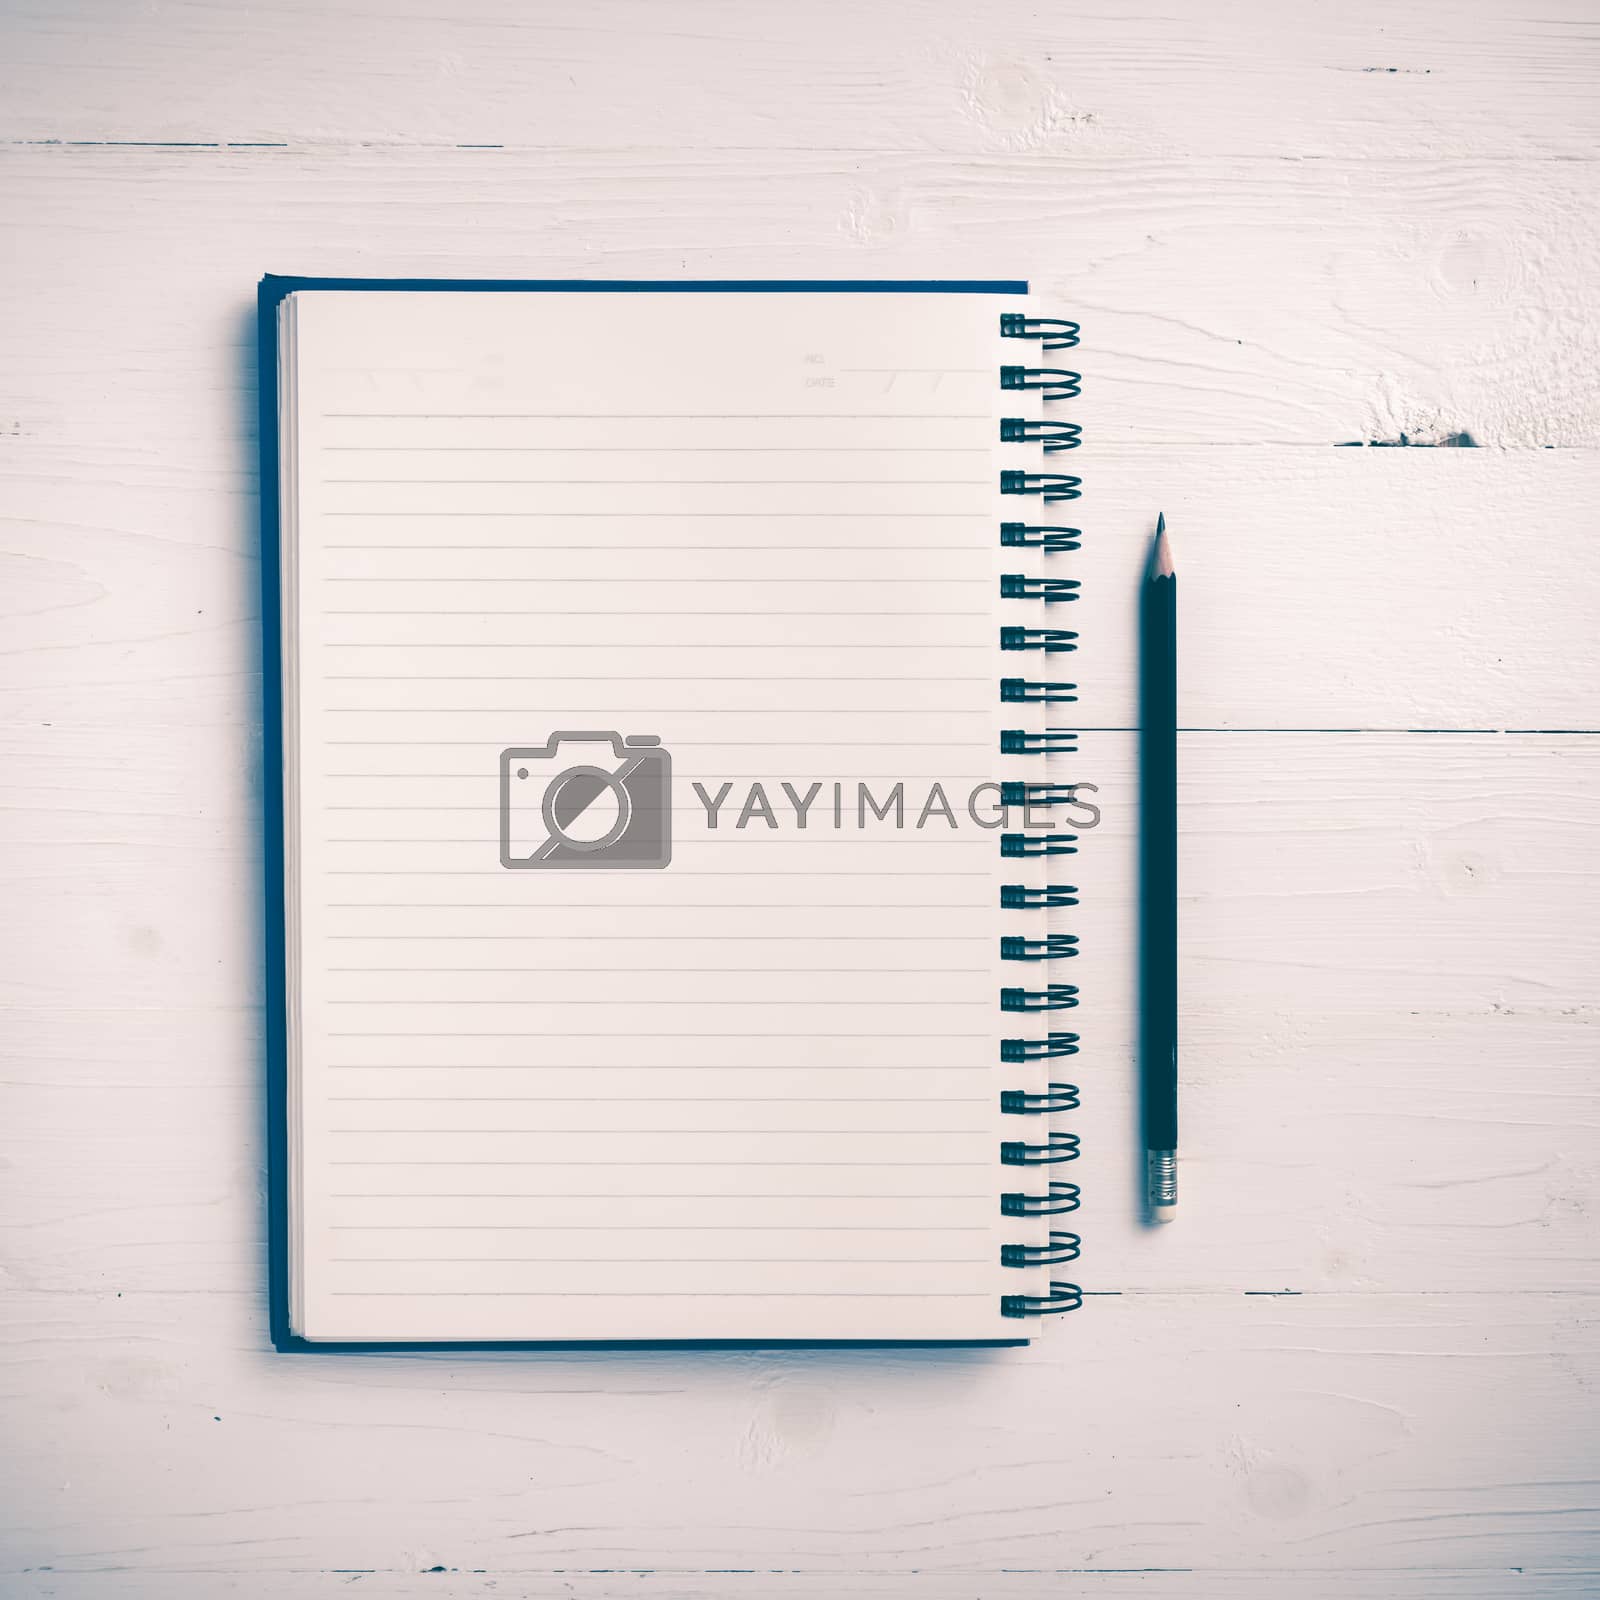 Royalty free image of notepad with pen vintage style by ammza12